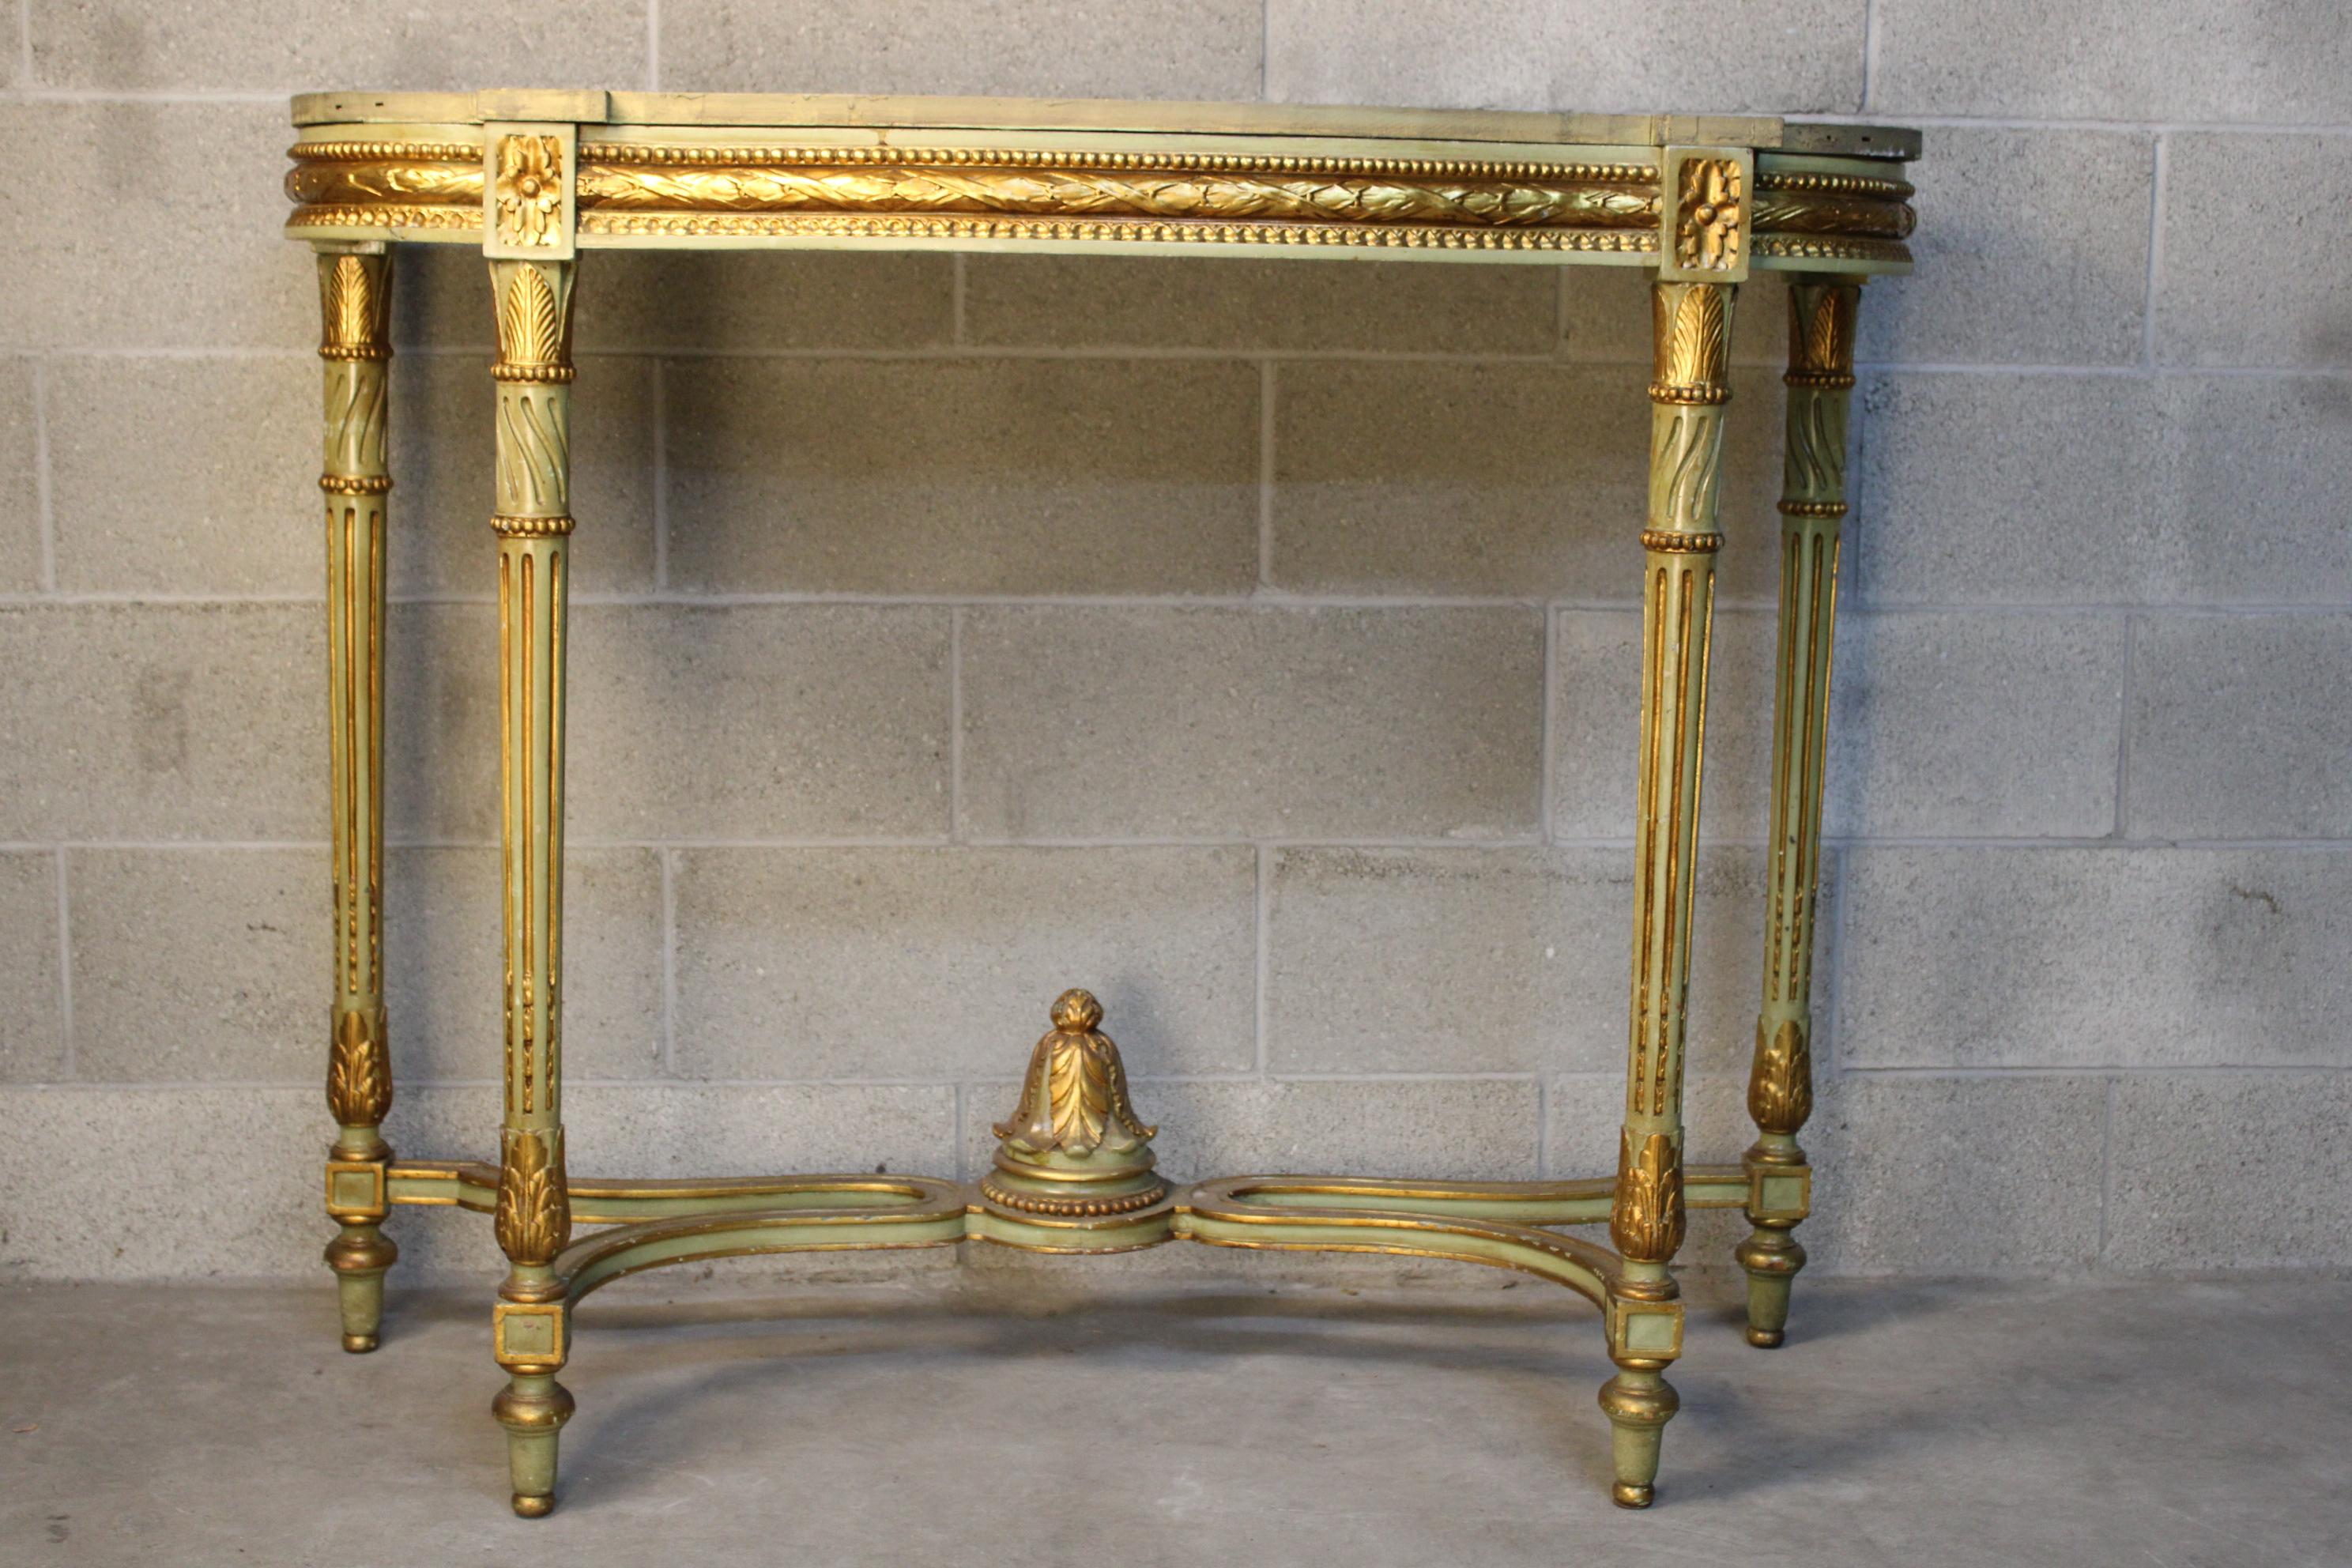 Louis XVI console table gilded and Carved circa 1870 Italy 
gilded and carved wood in good condition. Beautiful piece.
storage and container shipping is available